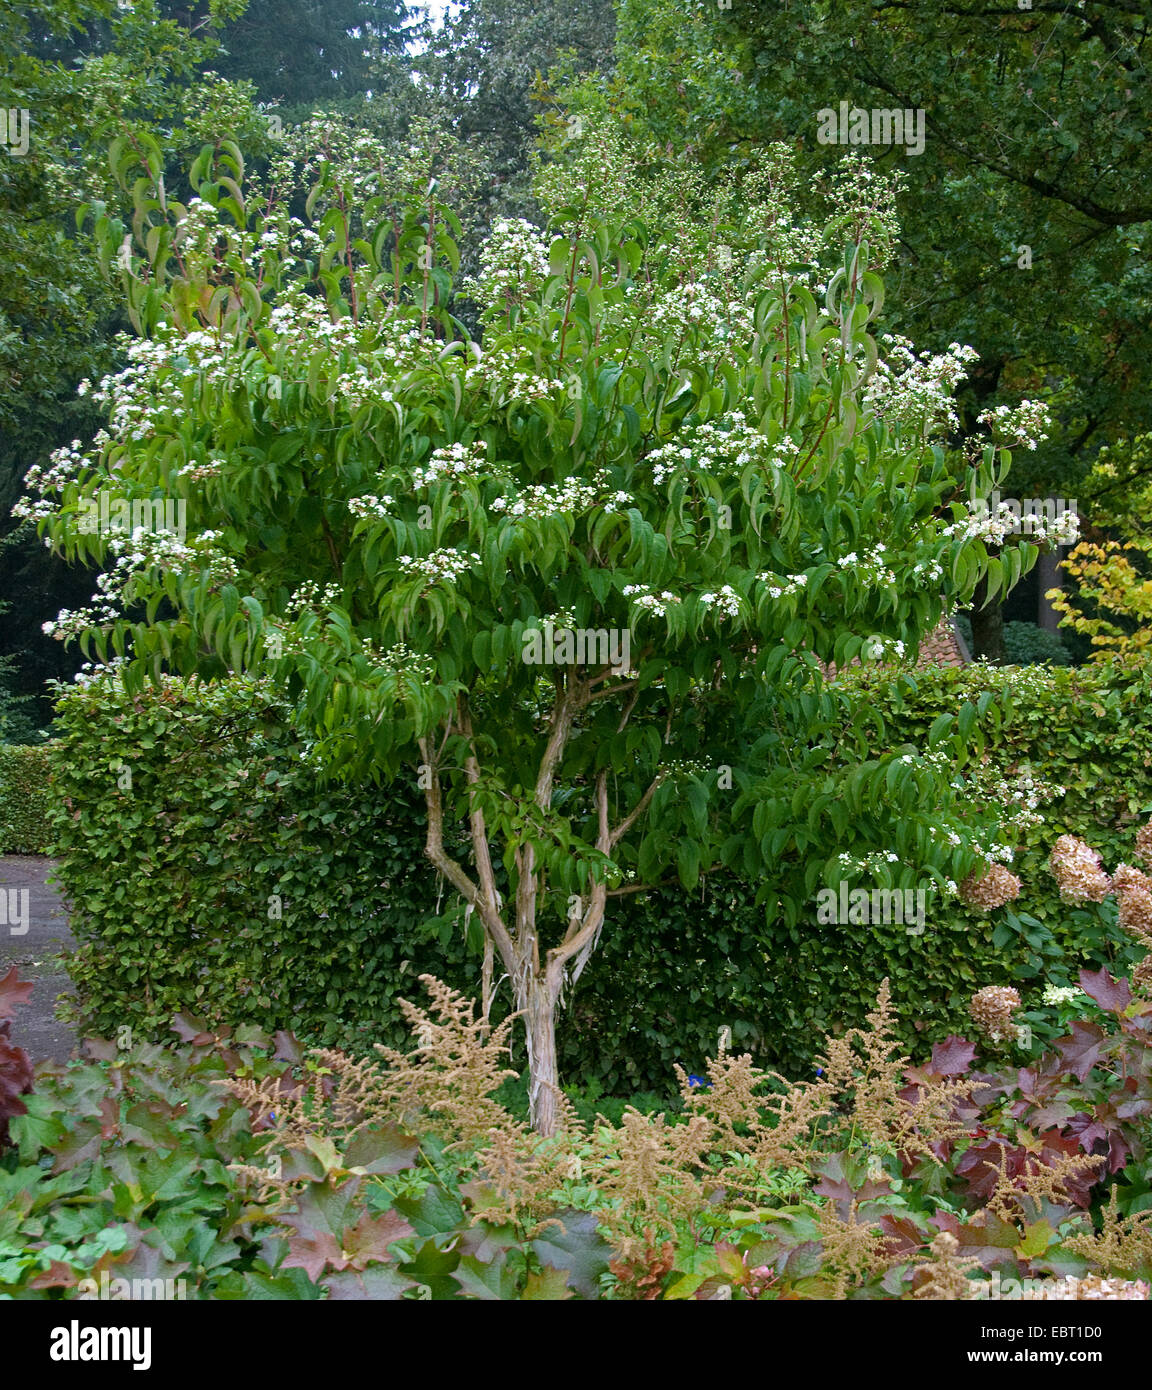 Seven Sons plant (Heptacodium miconioides), blooming Stock Photo